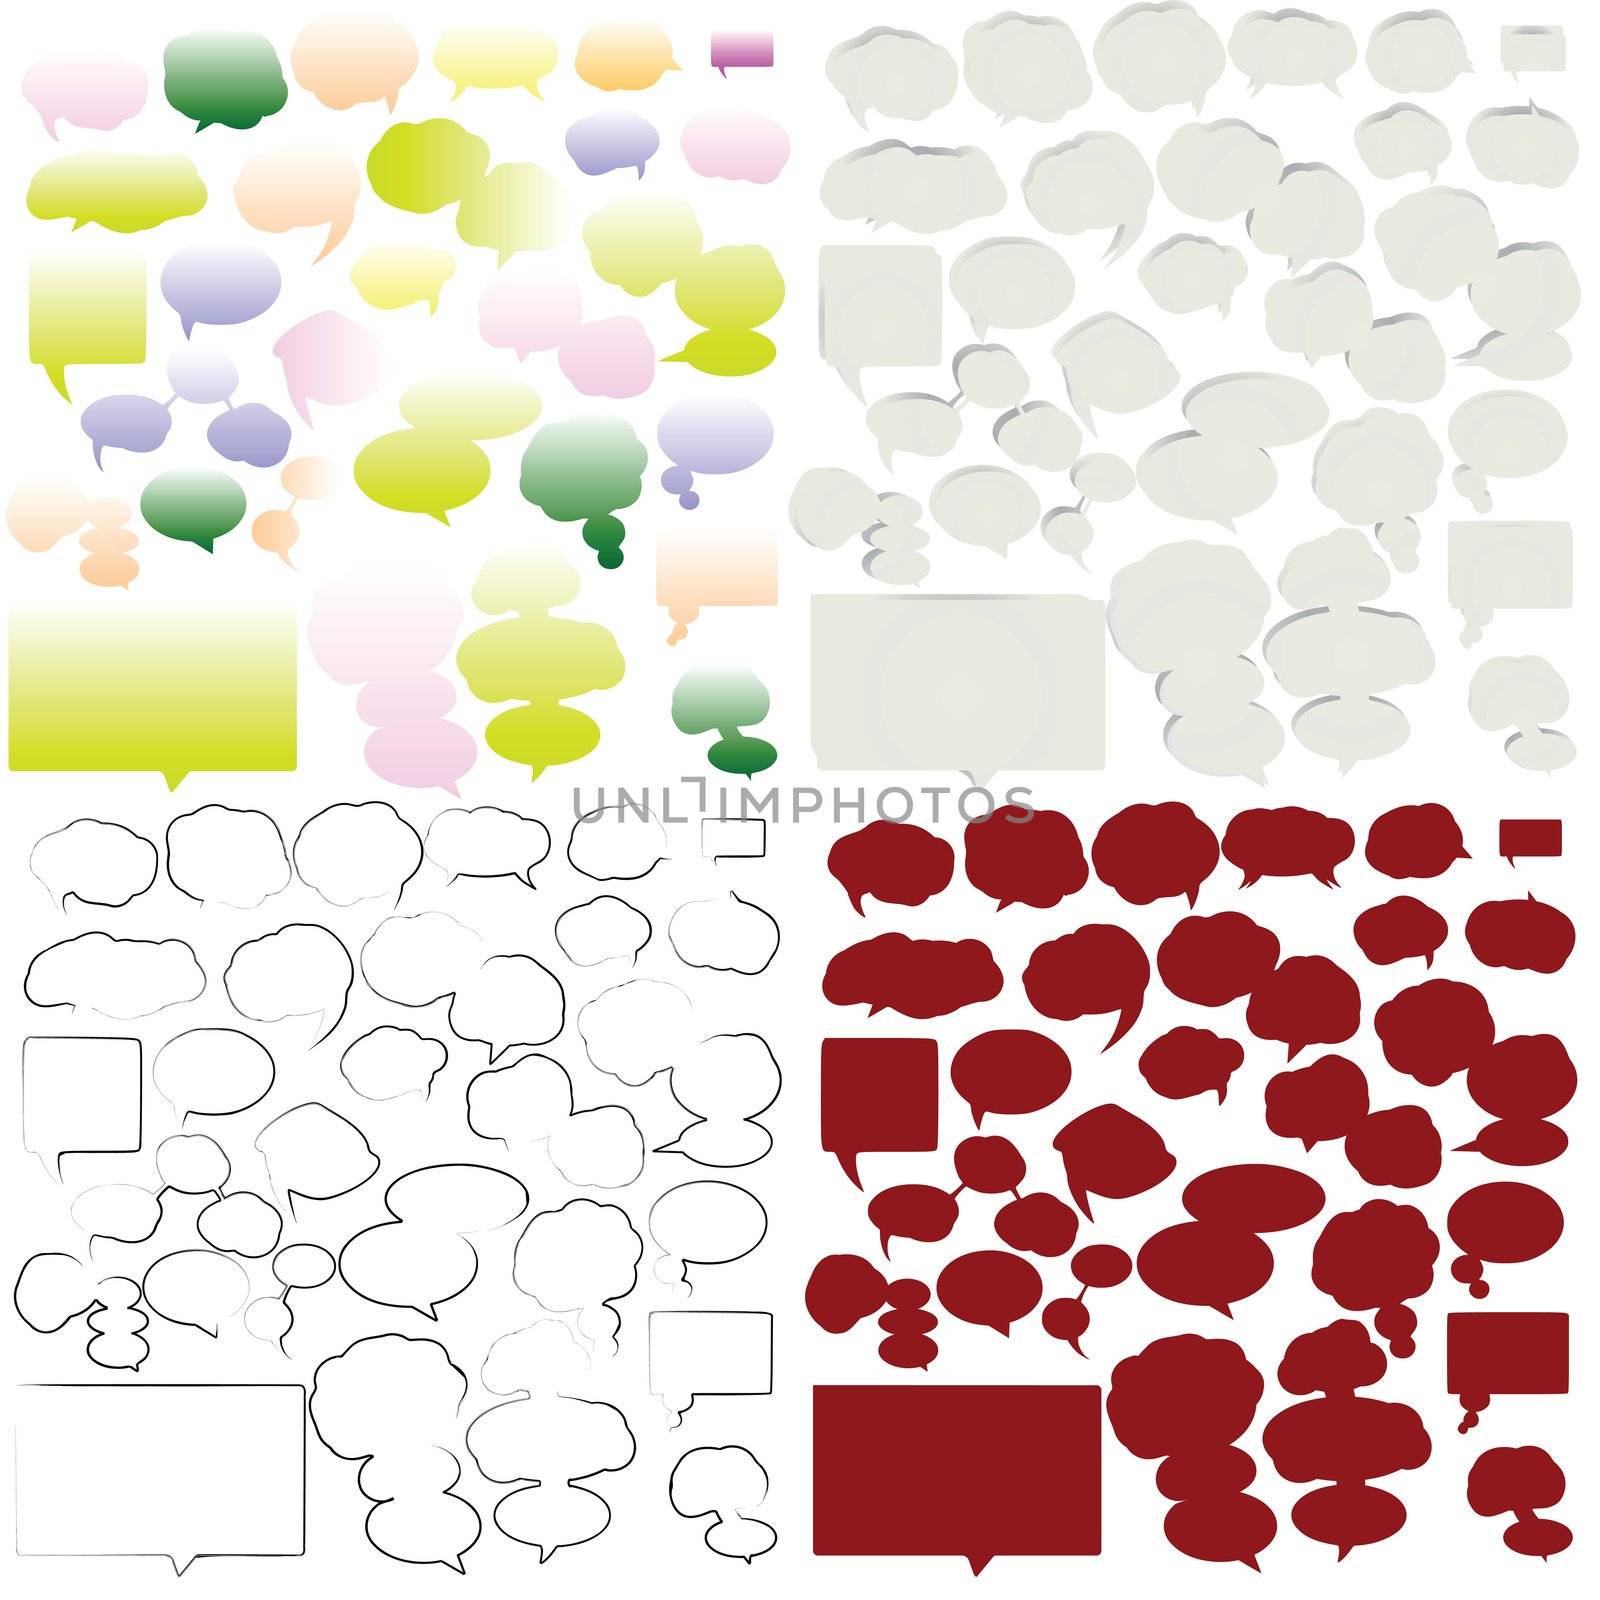 Variety of empty and stylized speech bubbles for text